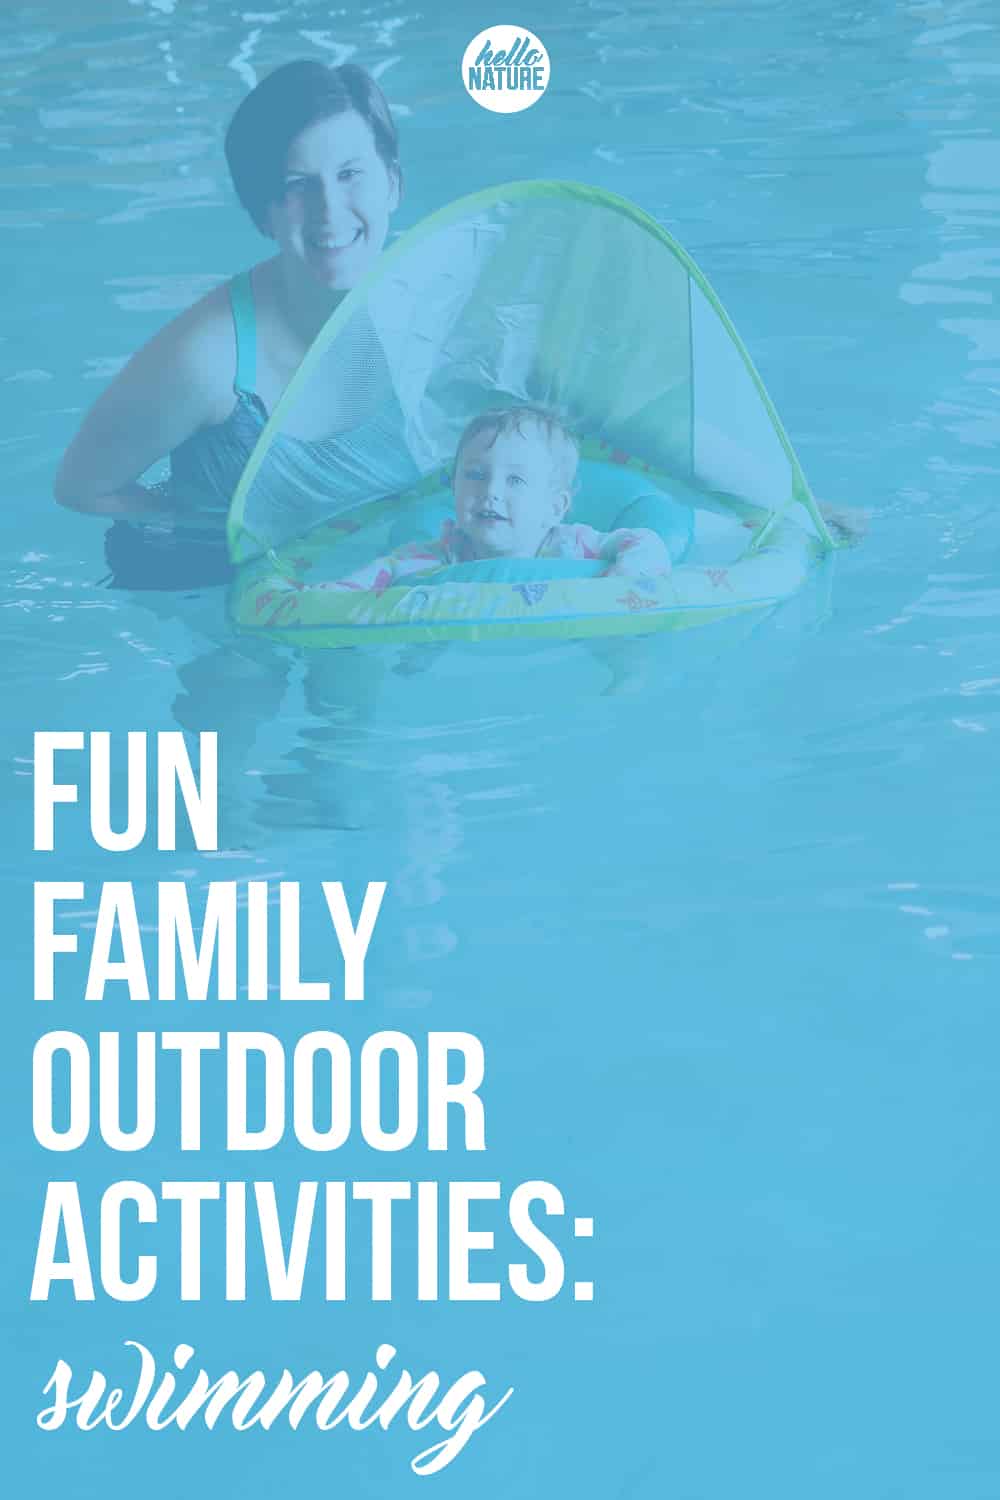 Looking for fun family outdoor activities? I've got you covered! Grab your swimsuit for this week's theme - it's all about swimming!